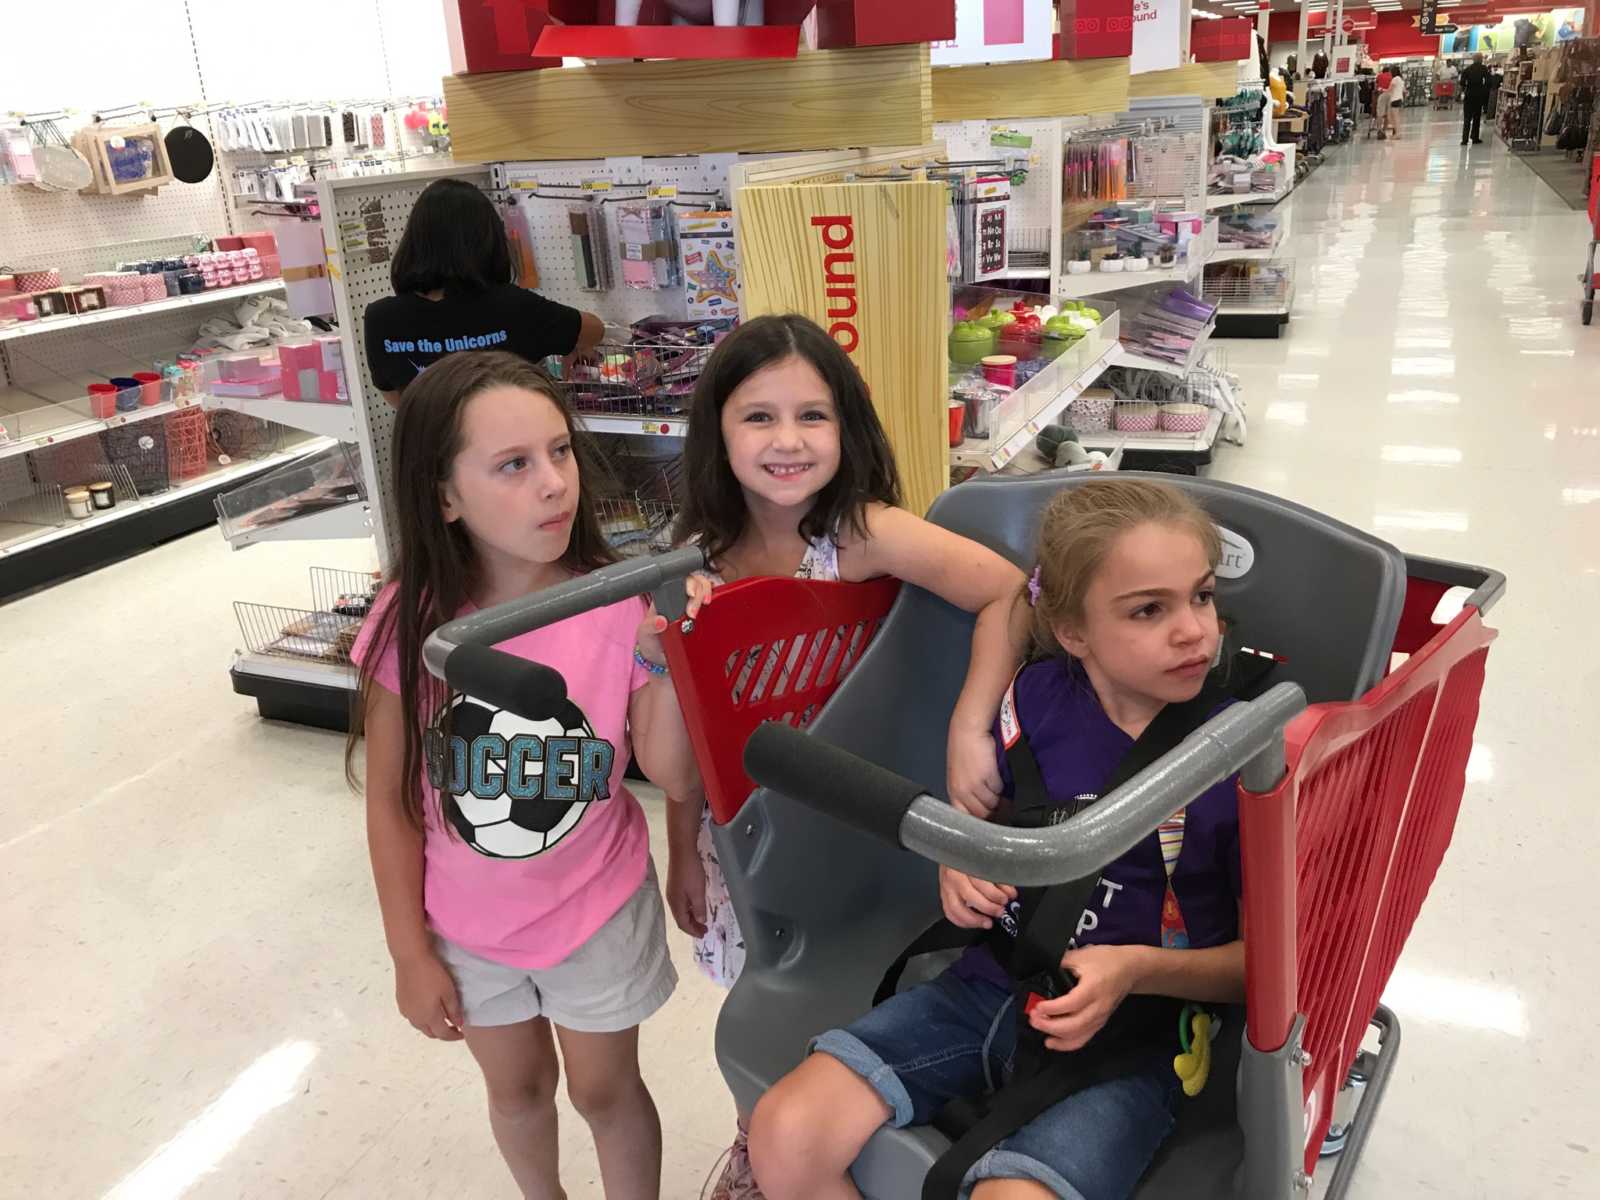 young girl with terminal illness sits in target shopping cart with young girls standing next to her in target aisle